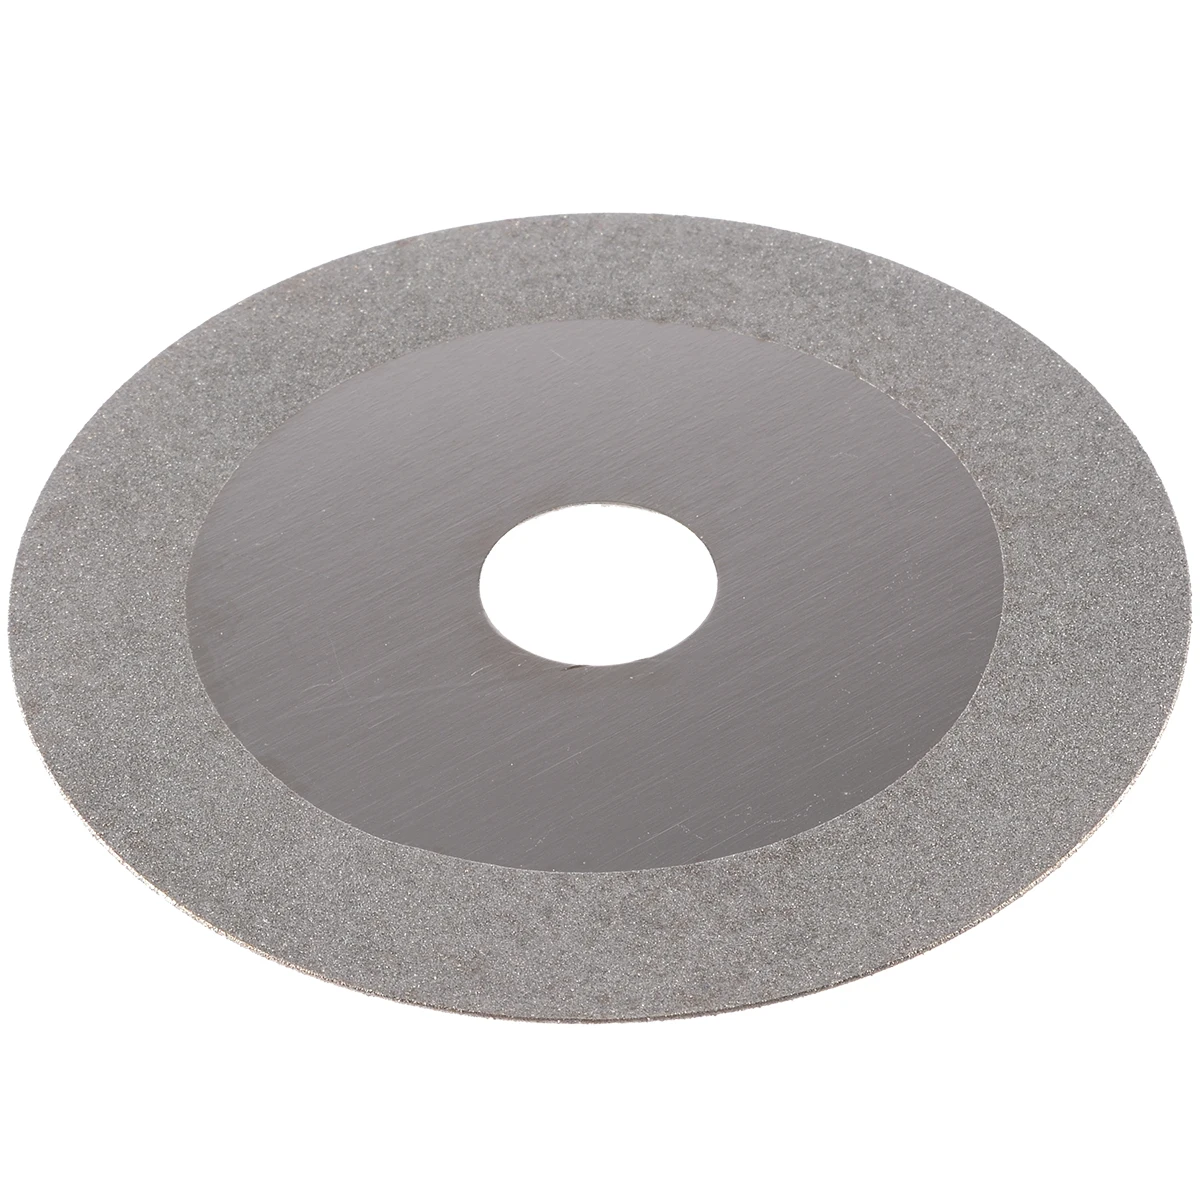 4inch Mayitr Diamond Coated Grinding Wheel Disc for Carbide Angle Grinder Wheels Power Tools Accessories 100*20mm